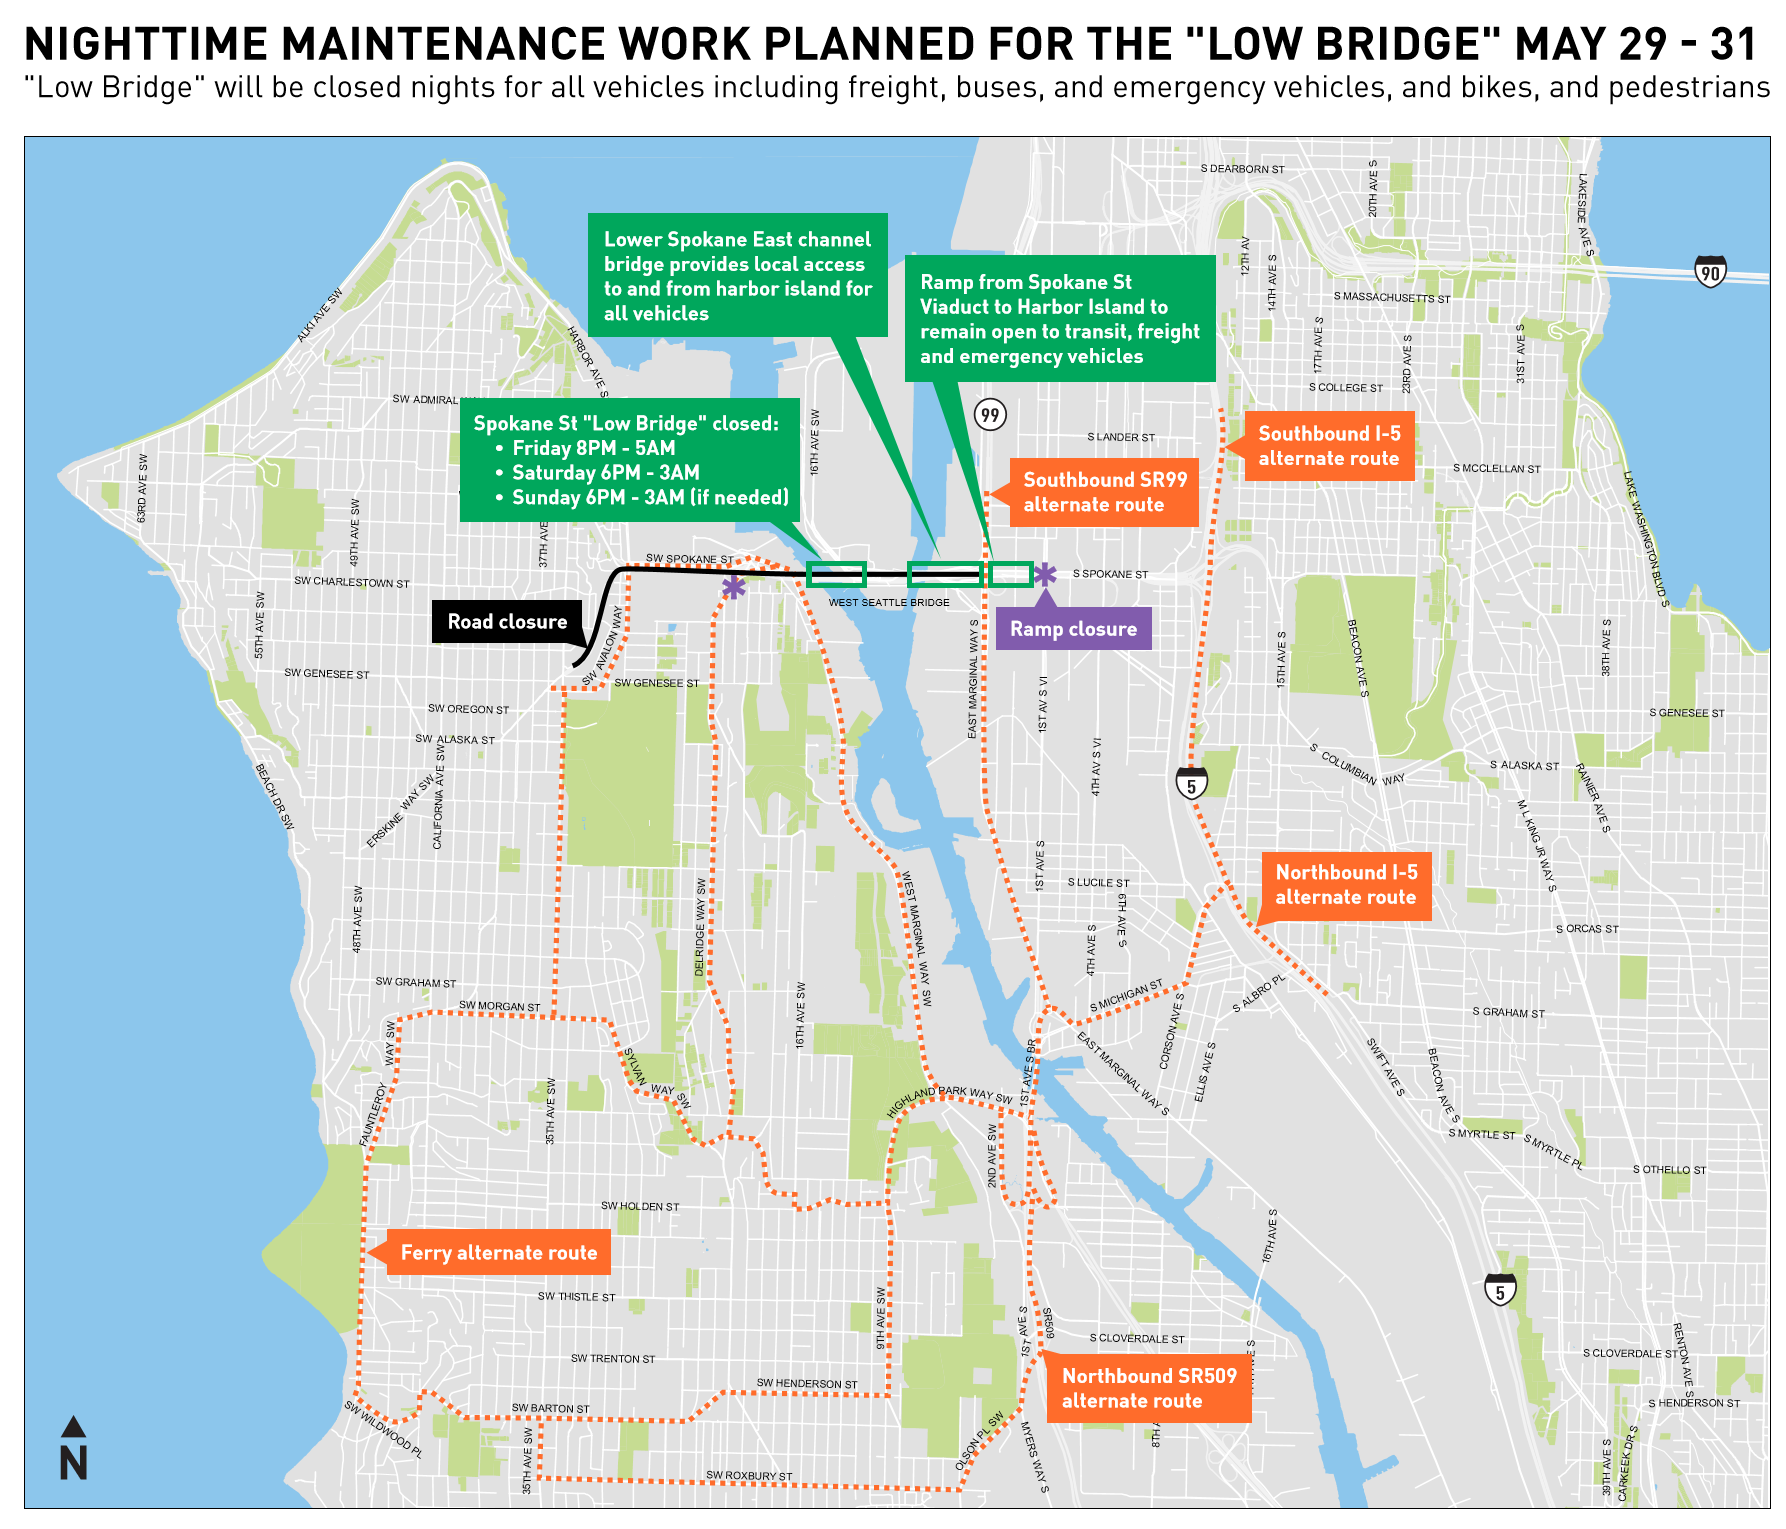 A map showing the nighttime maintenance planned for the low bridge.